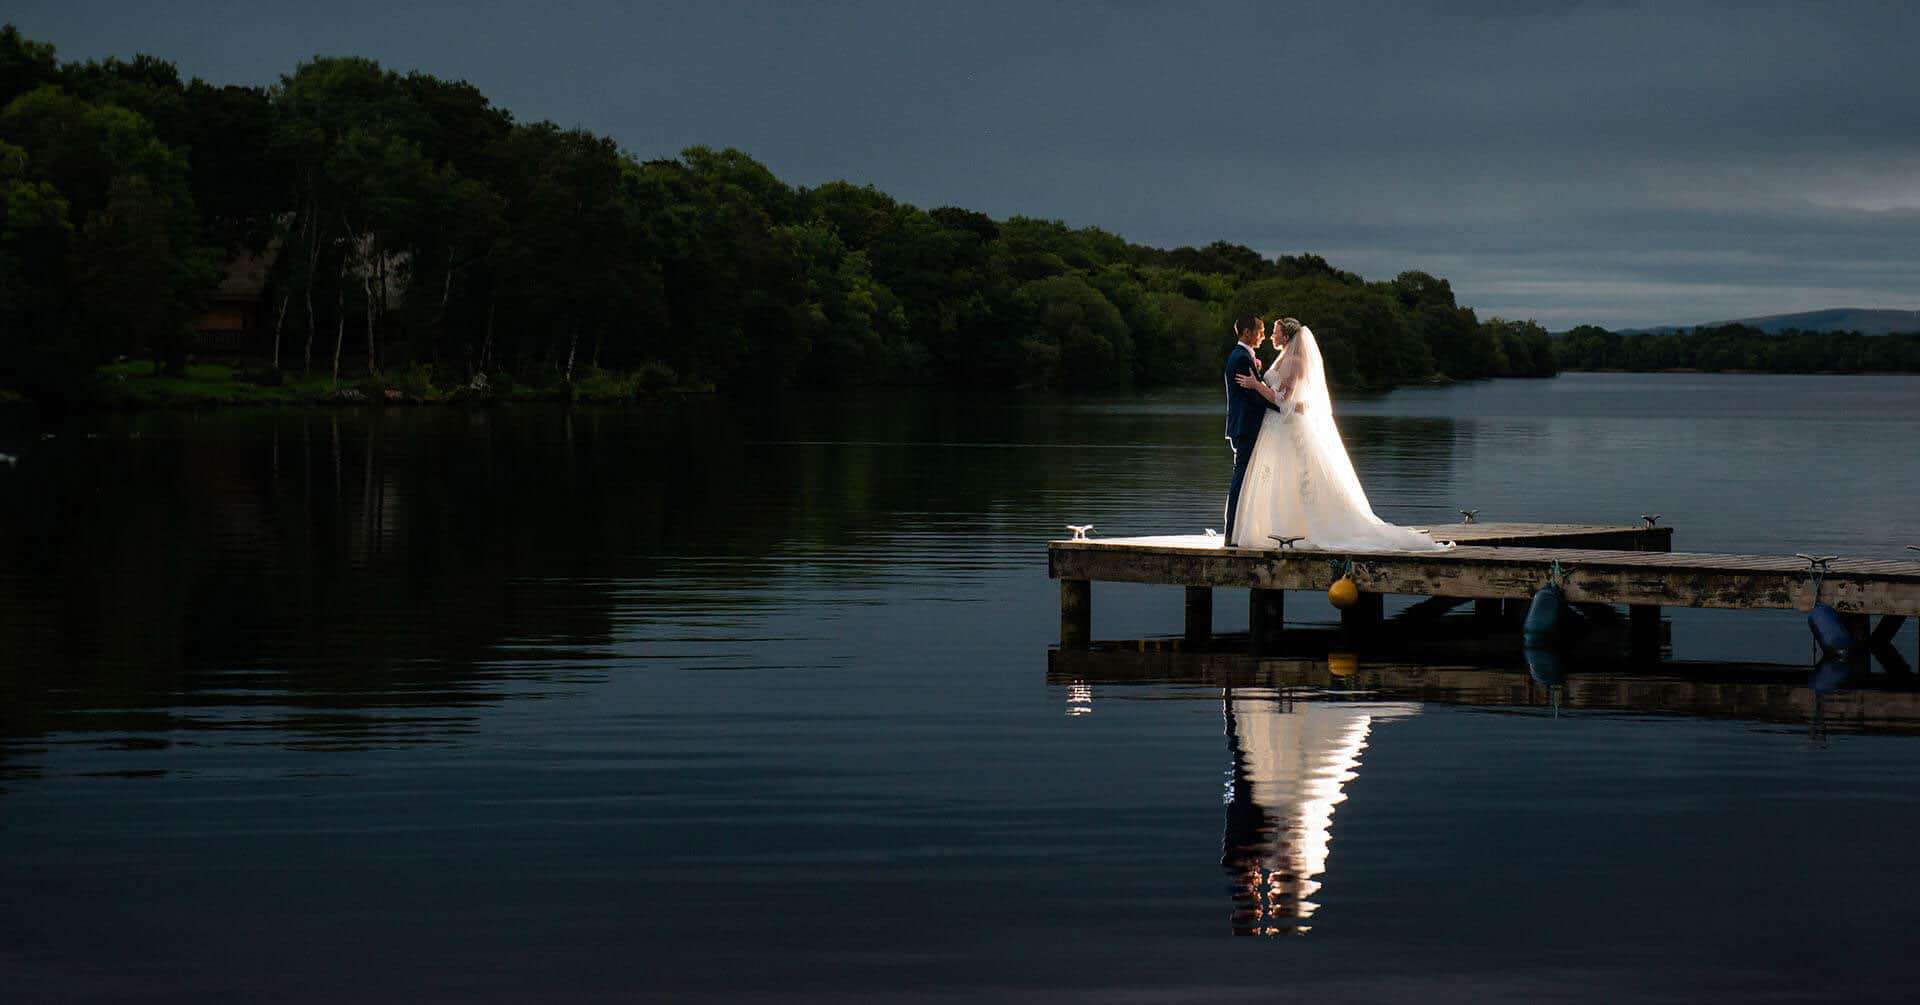 Online Wedding Photography Course